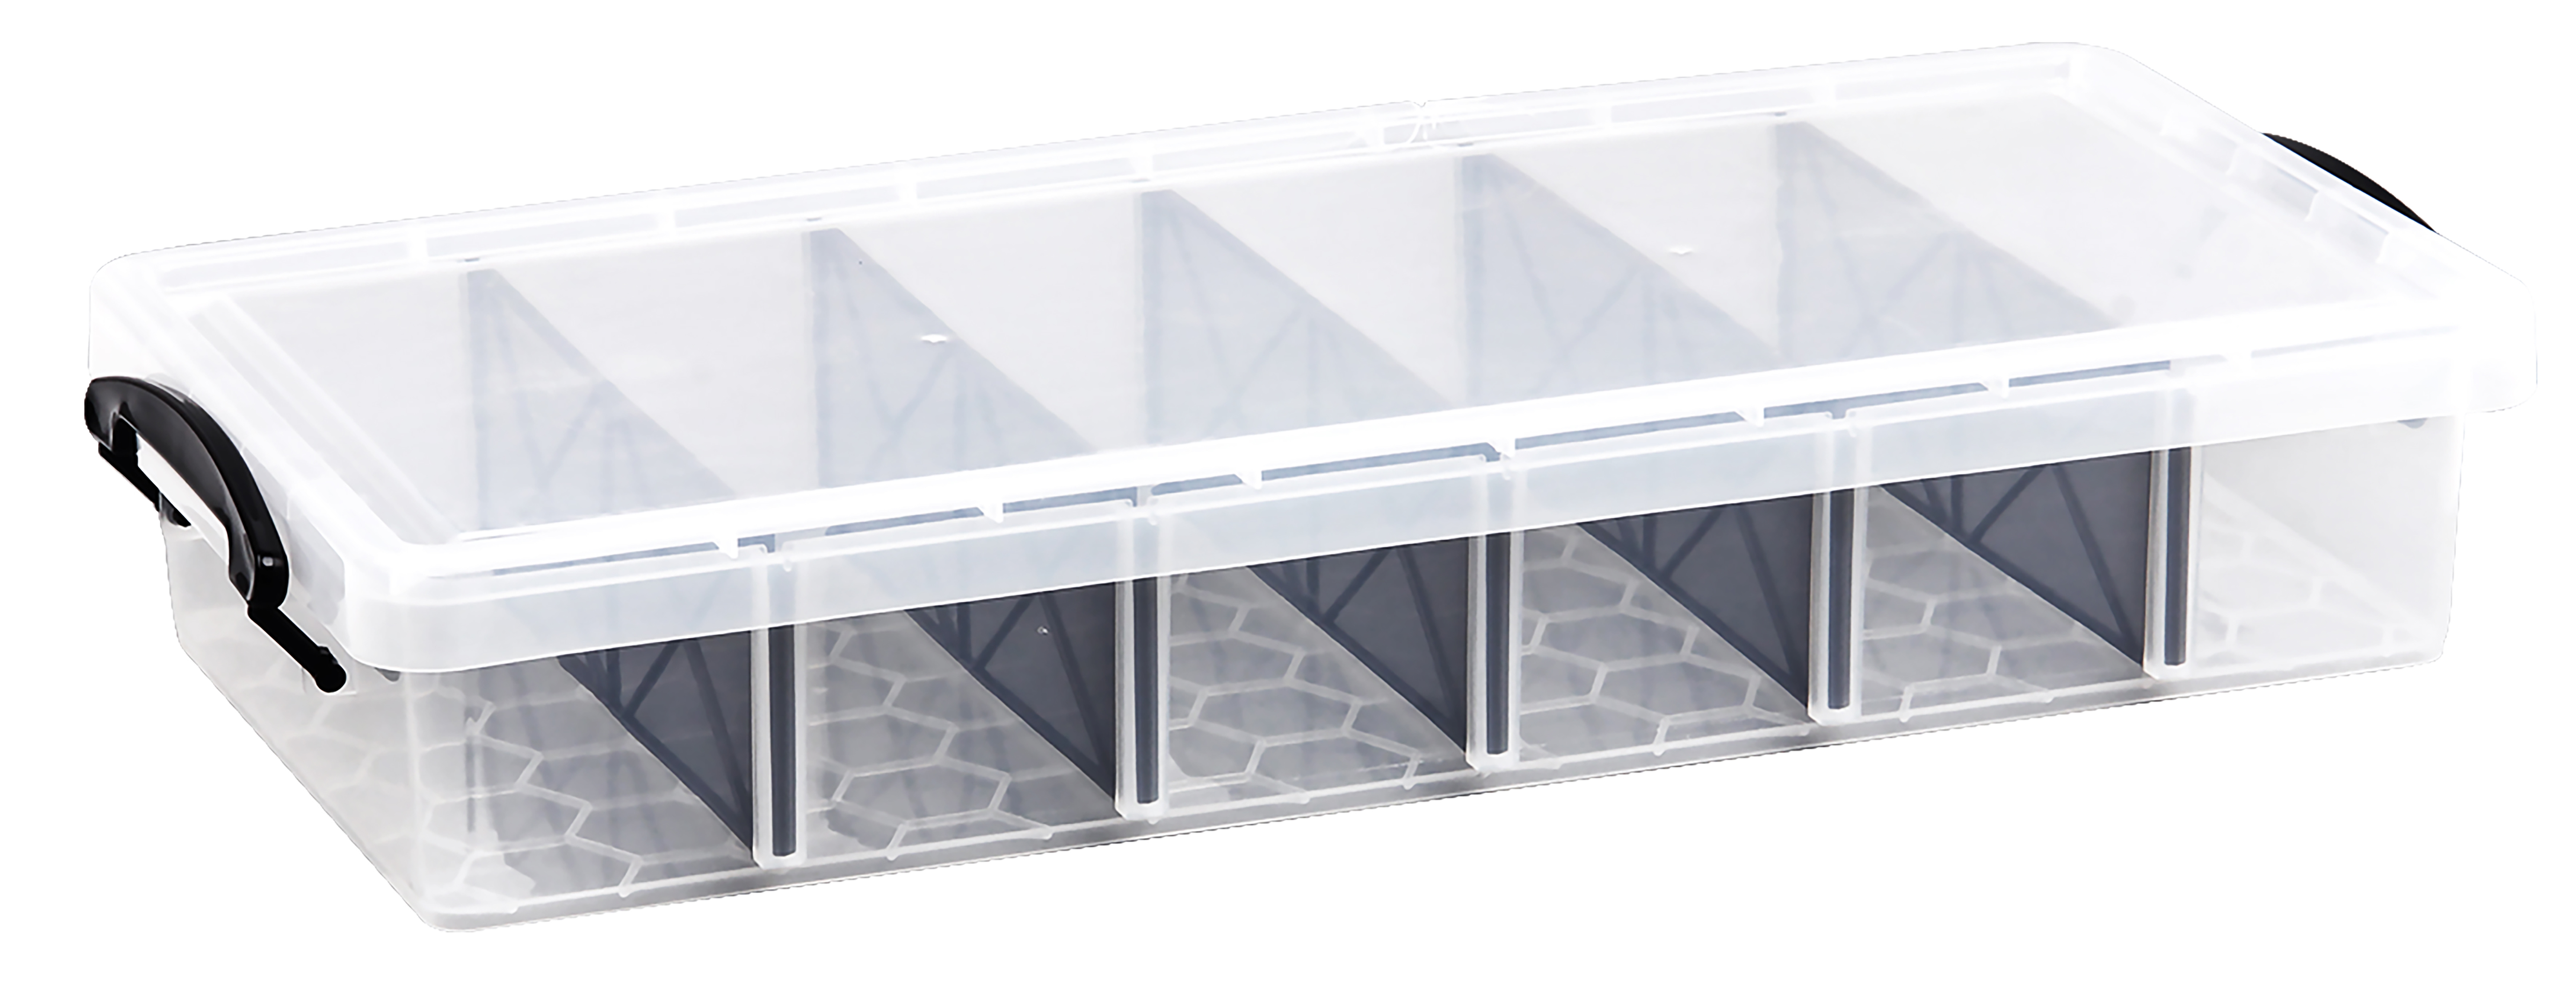 'LOW PROFILE' Underbed Storage Box with Removable Dividers 6.5L|9L|25L|35L - Plastic | Container